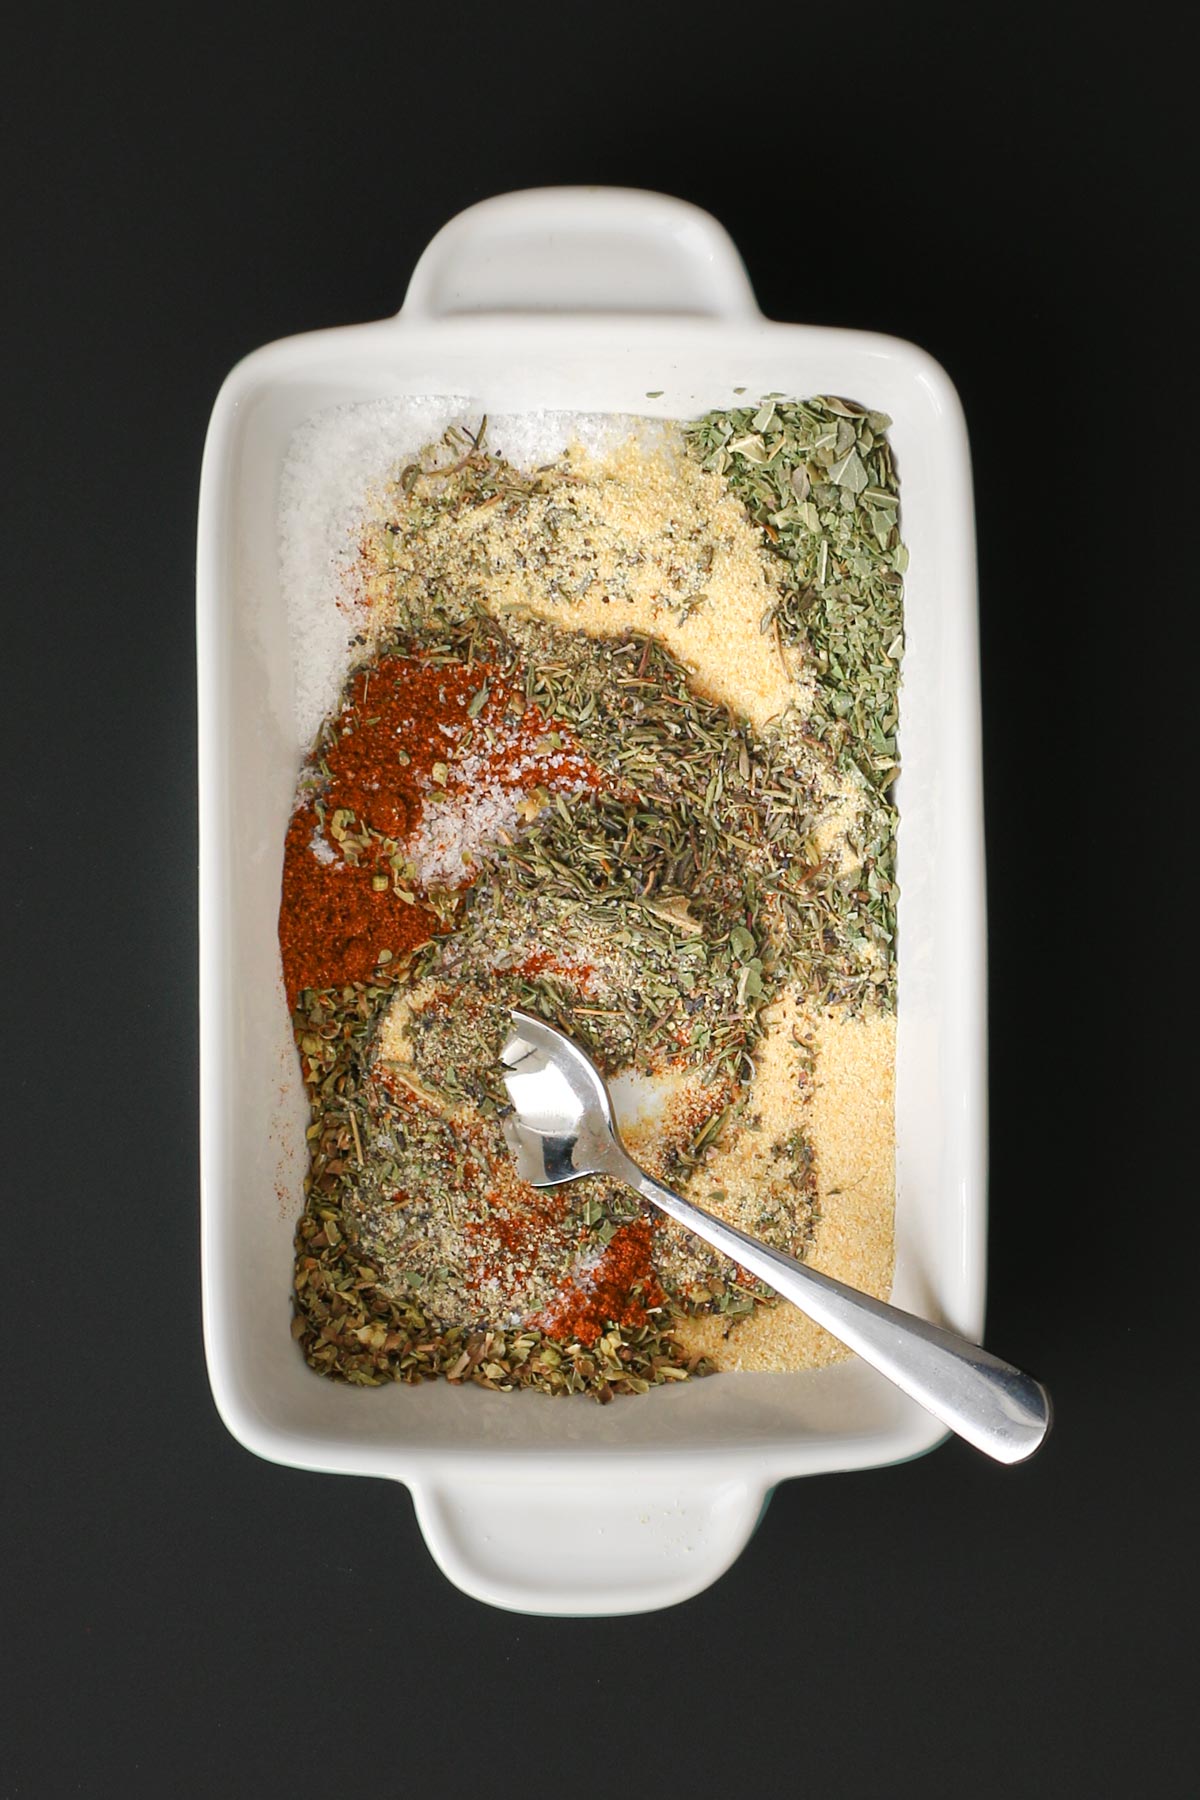 mixing the herbs and spices in white dish with a small spoon.